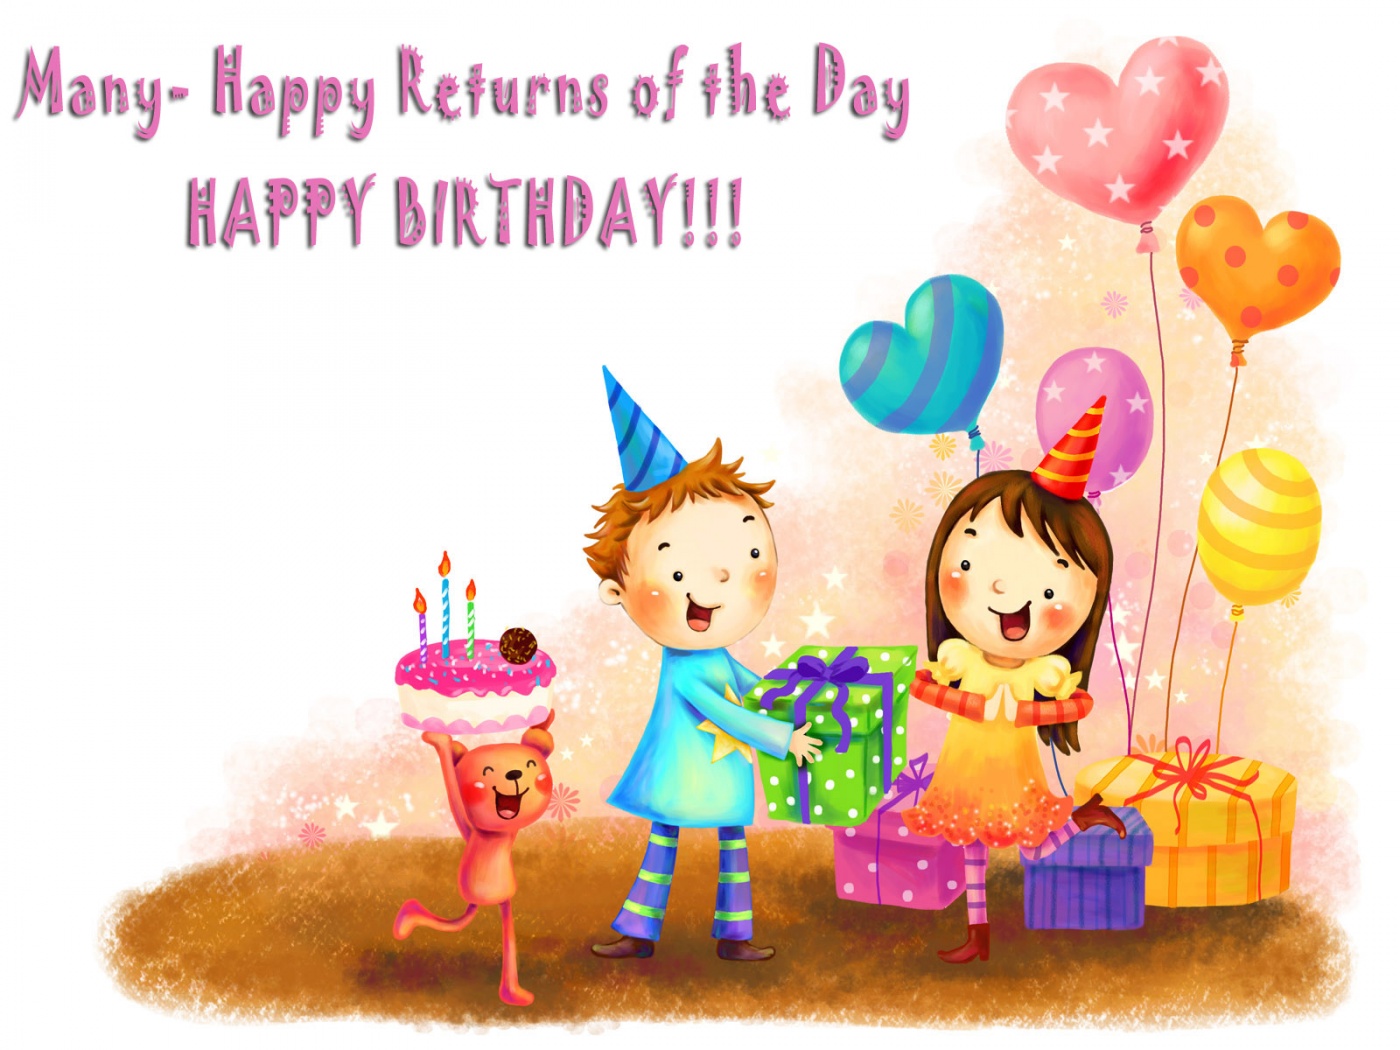 ShyBuzz's Not Just Another Blog: Happy Birthday My Sister...